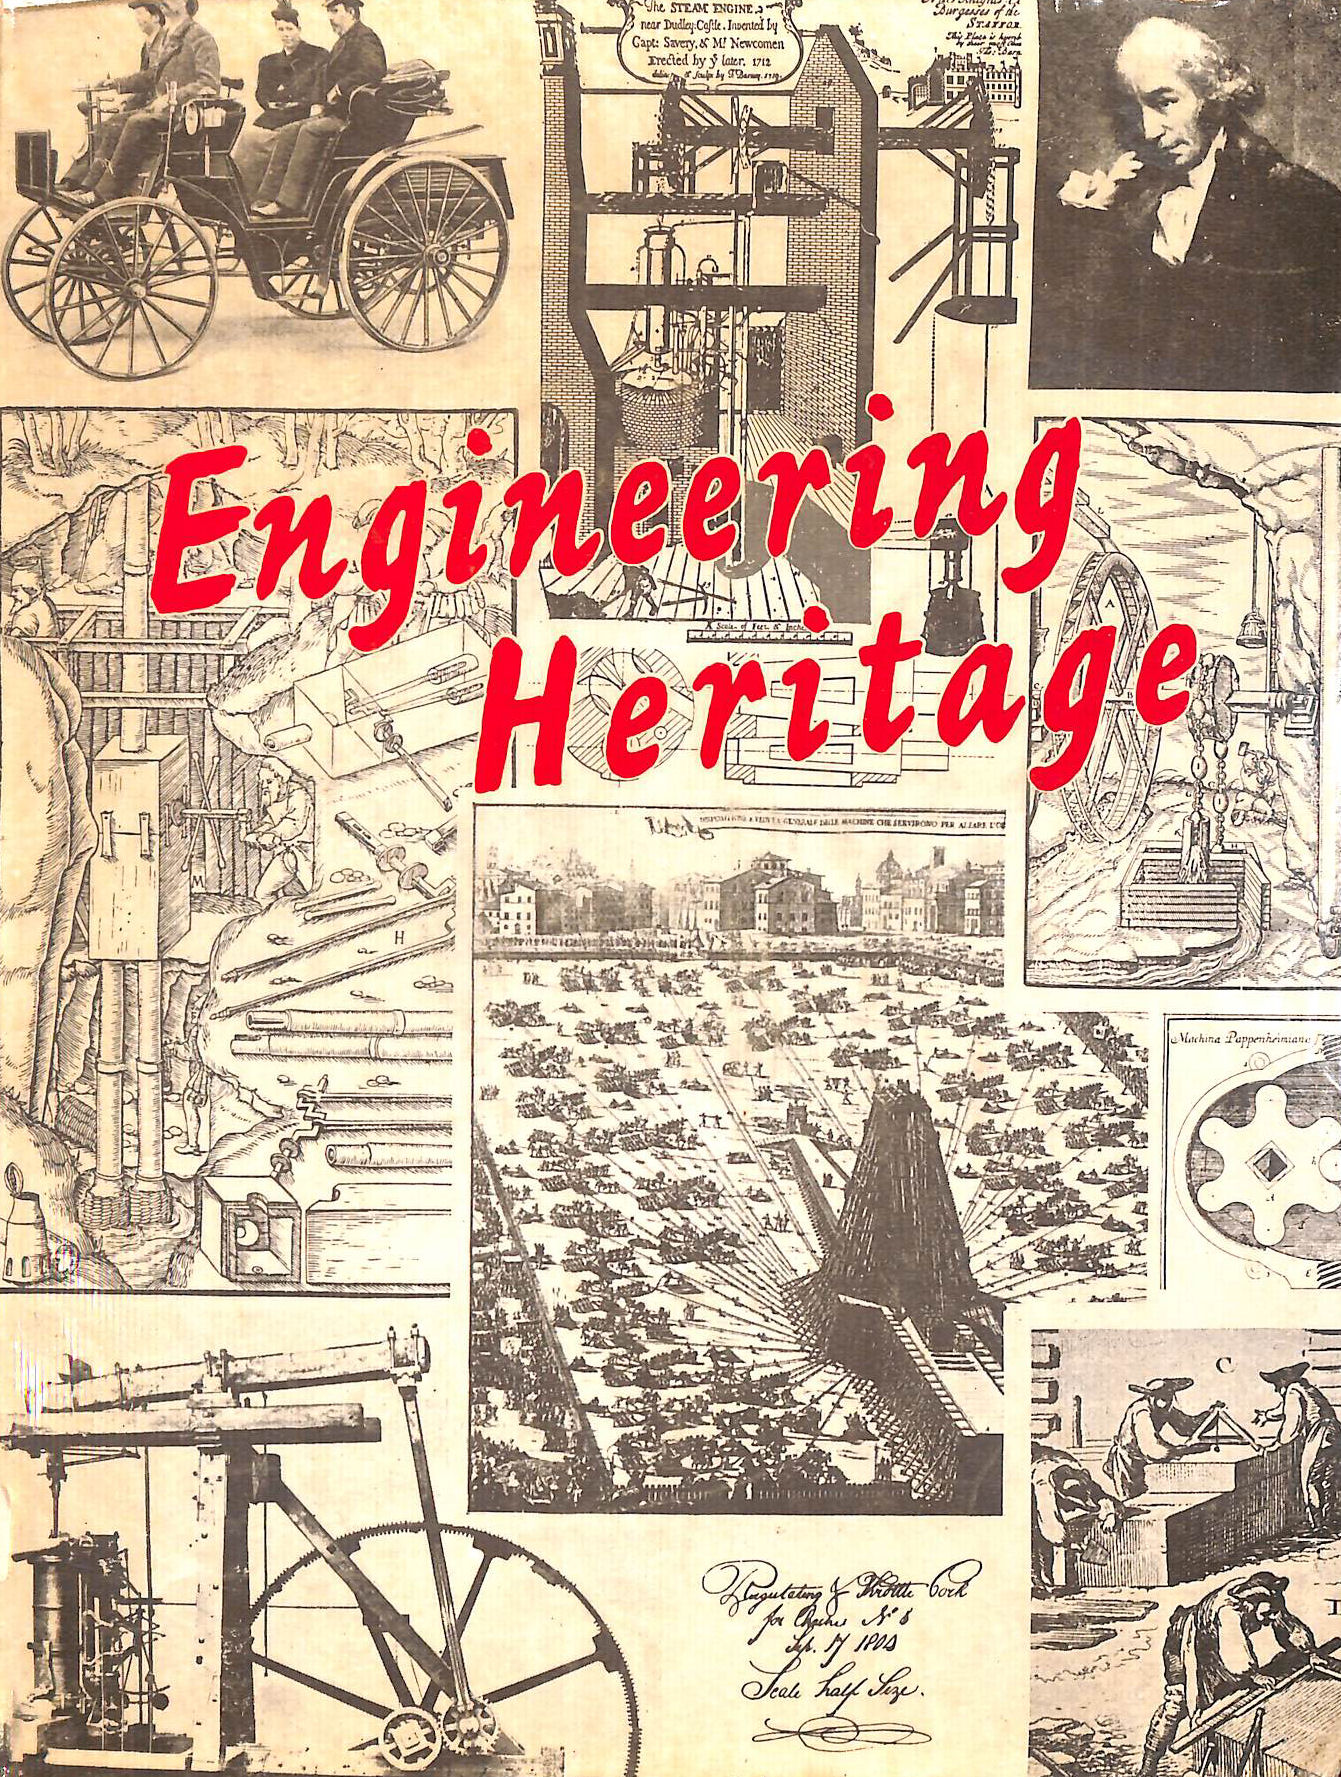 INSTITUTION OF MECHANICAL ENGINEERS - Engineering Heritage. Highlights from the History of Mechanical Engineering. Volume 1.